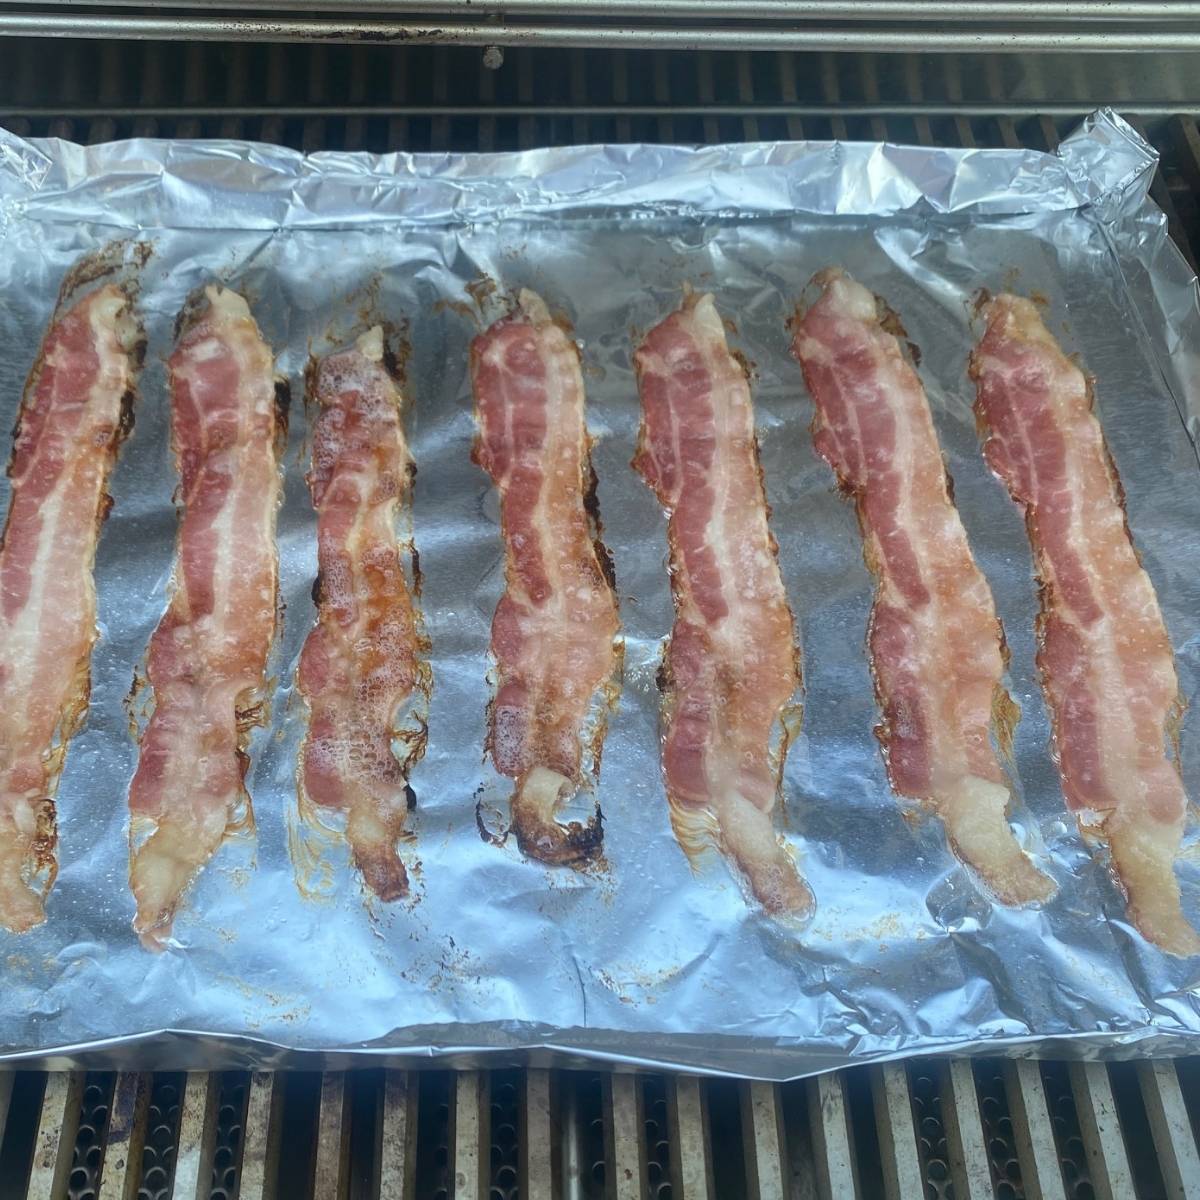 Cooking Bacon On A Grill With Aluminum Foil • The Wicked Noodle